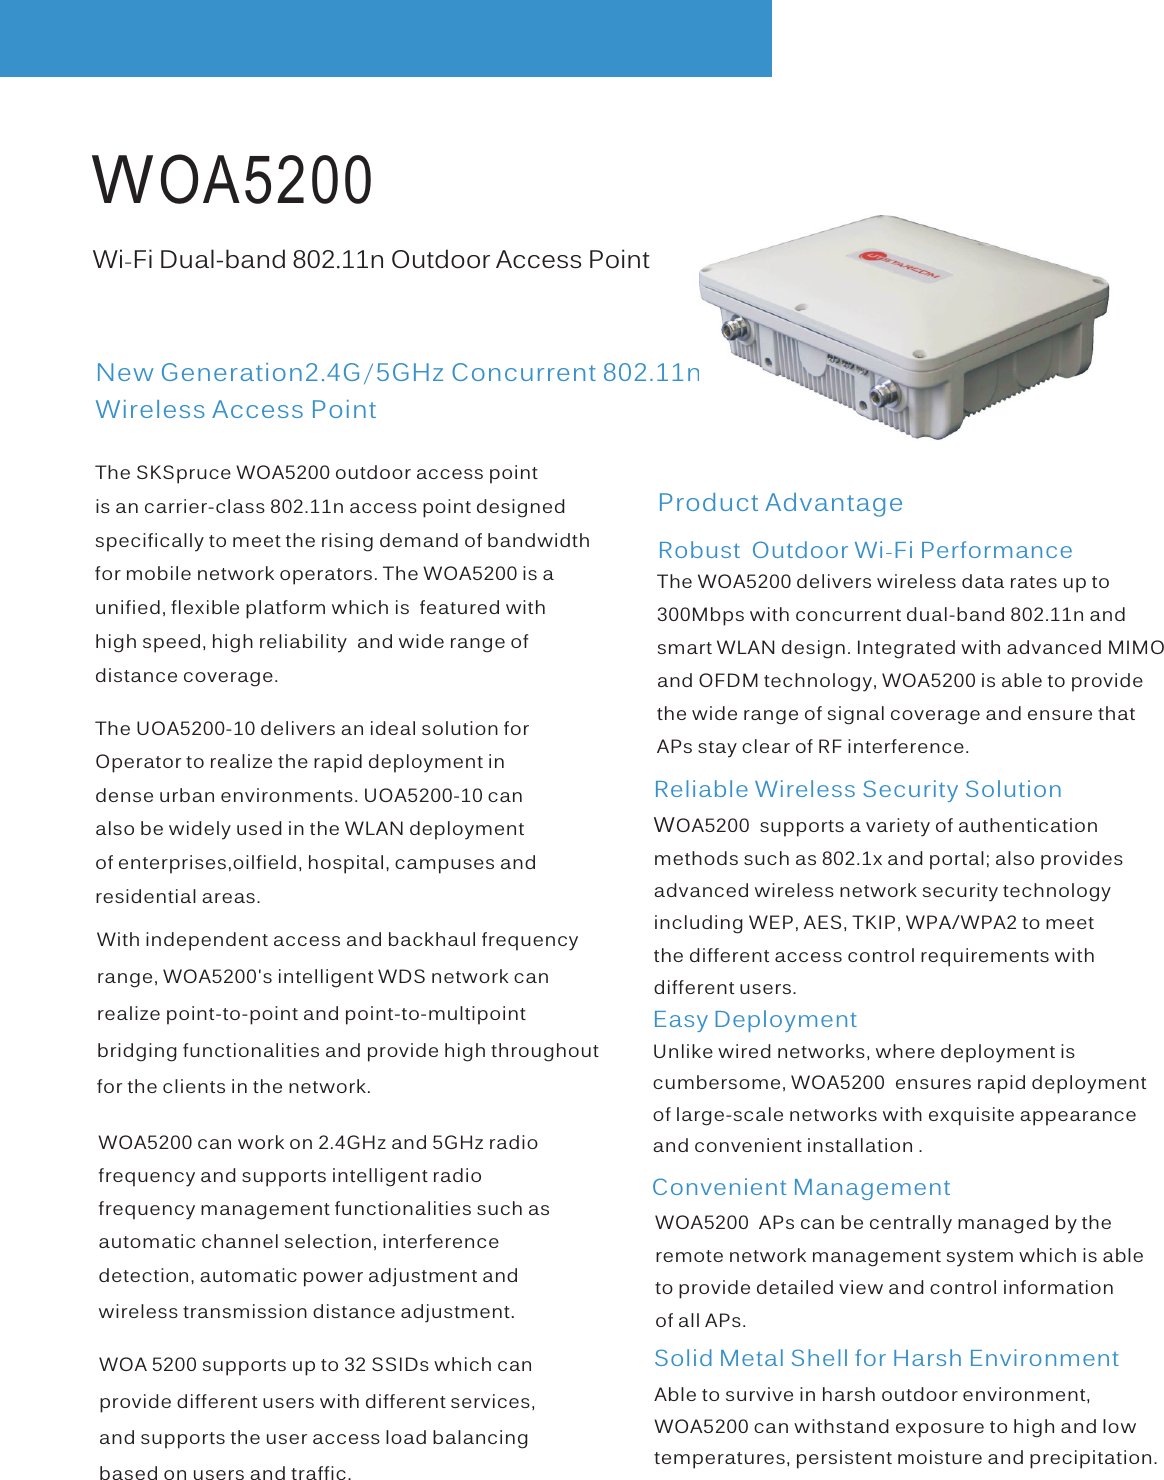  WOA5200Product AdvantageEasy DeploymentWi-Fi Dual-band 802.11n Outdoor Access PointNew Generation2.4G/5GHz Concurrent 802.11n Wireless Access Point Solid Metal Shell for Harsh EnvironmentRobust  Outdoor Wi-Fi PerformanceReliable Wireless Security SolutionThe SKSpruce WOA5200 outdoor access point is an carrier-class 802.11n access point designedspecifically to meet the rising demand of bandwidthfor mobile network operators. The WOA5200 is aunified, flexible platform which is  featured withhigh speed, high reliability  and wide range of distance coverage. The UOA5200-10 delivers an ideal solution for Operator to realize the rapid deployment in dense urban environments. UOA5200-10 can also be widely used in the WLAN deployment of enterprises,oilfield, hospital, campuses andresidential areas.WOA 5200 supports up to 32 SSIDs which can provide different users with different services, and supports the user access load balancing based on users and traffic.WOA5200 can work on 2.4GHz and 5GHz radio frequency and supports intelligent radio frequency management functionalities such as automatic channel selection, interference detection, automatic power adjustment and wireless transmission distance adjustment.With independent access and backhaul frequencyrange, WOA5200&apos;s intelligent WDS network can realize point-to-point and point-to-multipoint bridging functionalities and provide high throughoutfor the clients in the network.The WOA5200 delivers wireless data rates up to 300Mbps with concurrent dual-band 802.11n and smart WLAN design. Integrated with advanced MIMO and OFDM technology, WOA5200 is able to provide the wide range of signal coverage and ensure that APs stay clear of RF interference.Wmethods such as 802.1x and portal; also provides advanced wireless network security technology including WEP, AES, TKIP, WPA/WPA2 to meet the different access control requirements with different users. OA5200  supports a variety of authentication Able to survive in harsh outdoor environment,WOA5200 can withstand exposure to high and lowtemperatures, persistent moisture and precipitation.Unlike wired networks, where deployment is cumbersome, WOA5200  ensures rapid deployment of large-scale networks with exquisite appearanceand convenient installation .WOA5200  APs can be centrally managed by the remote network management system which is able to provide detailed view and control information of all APs. Convenient Management